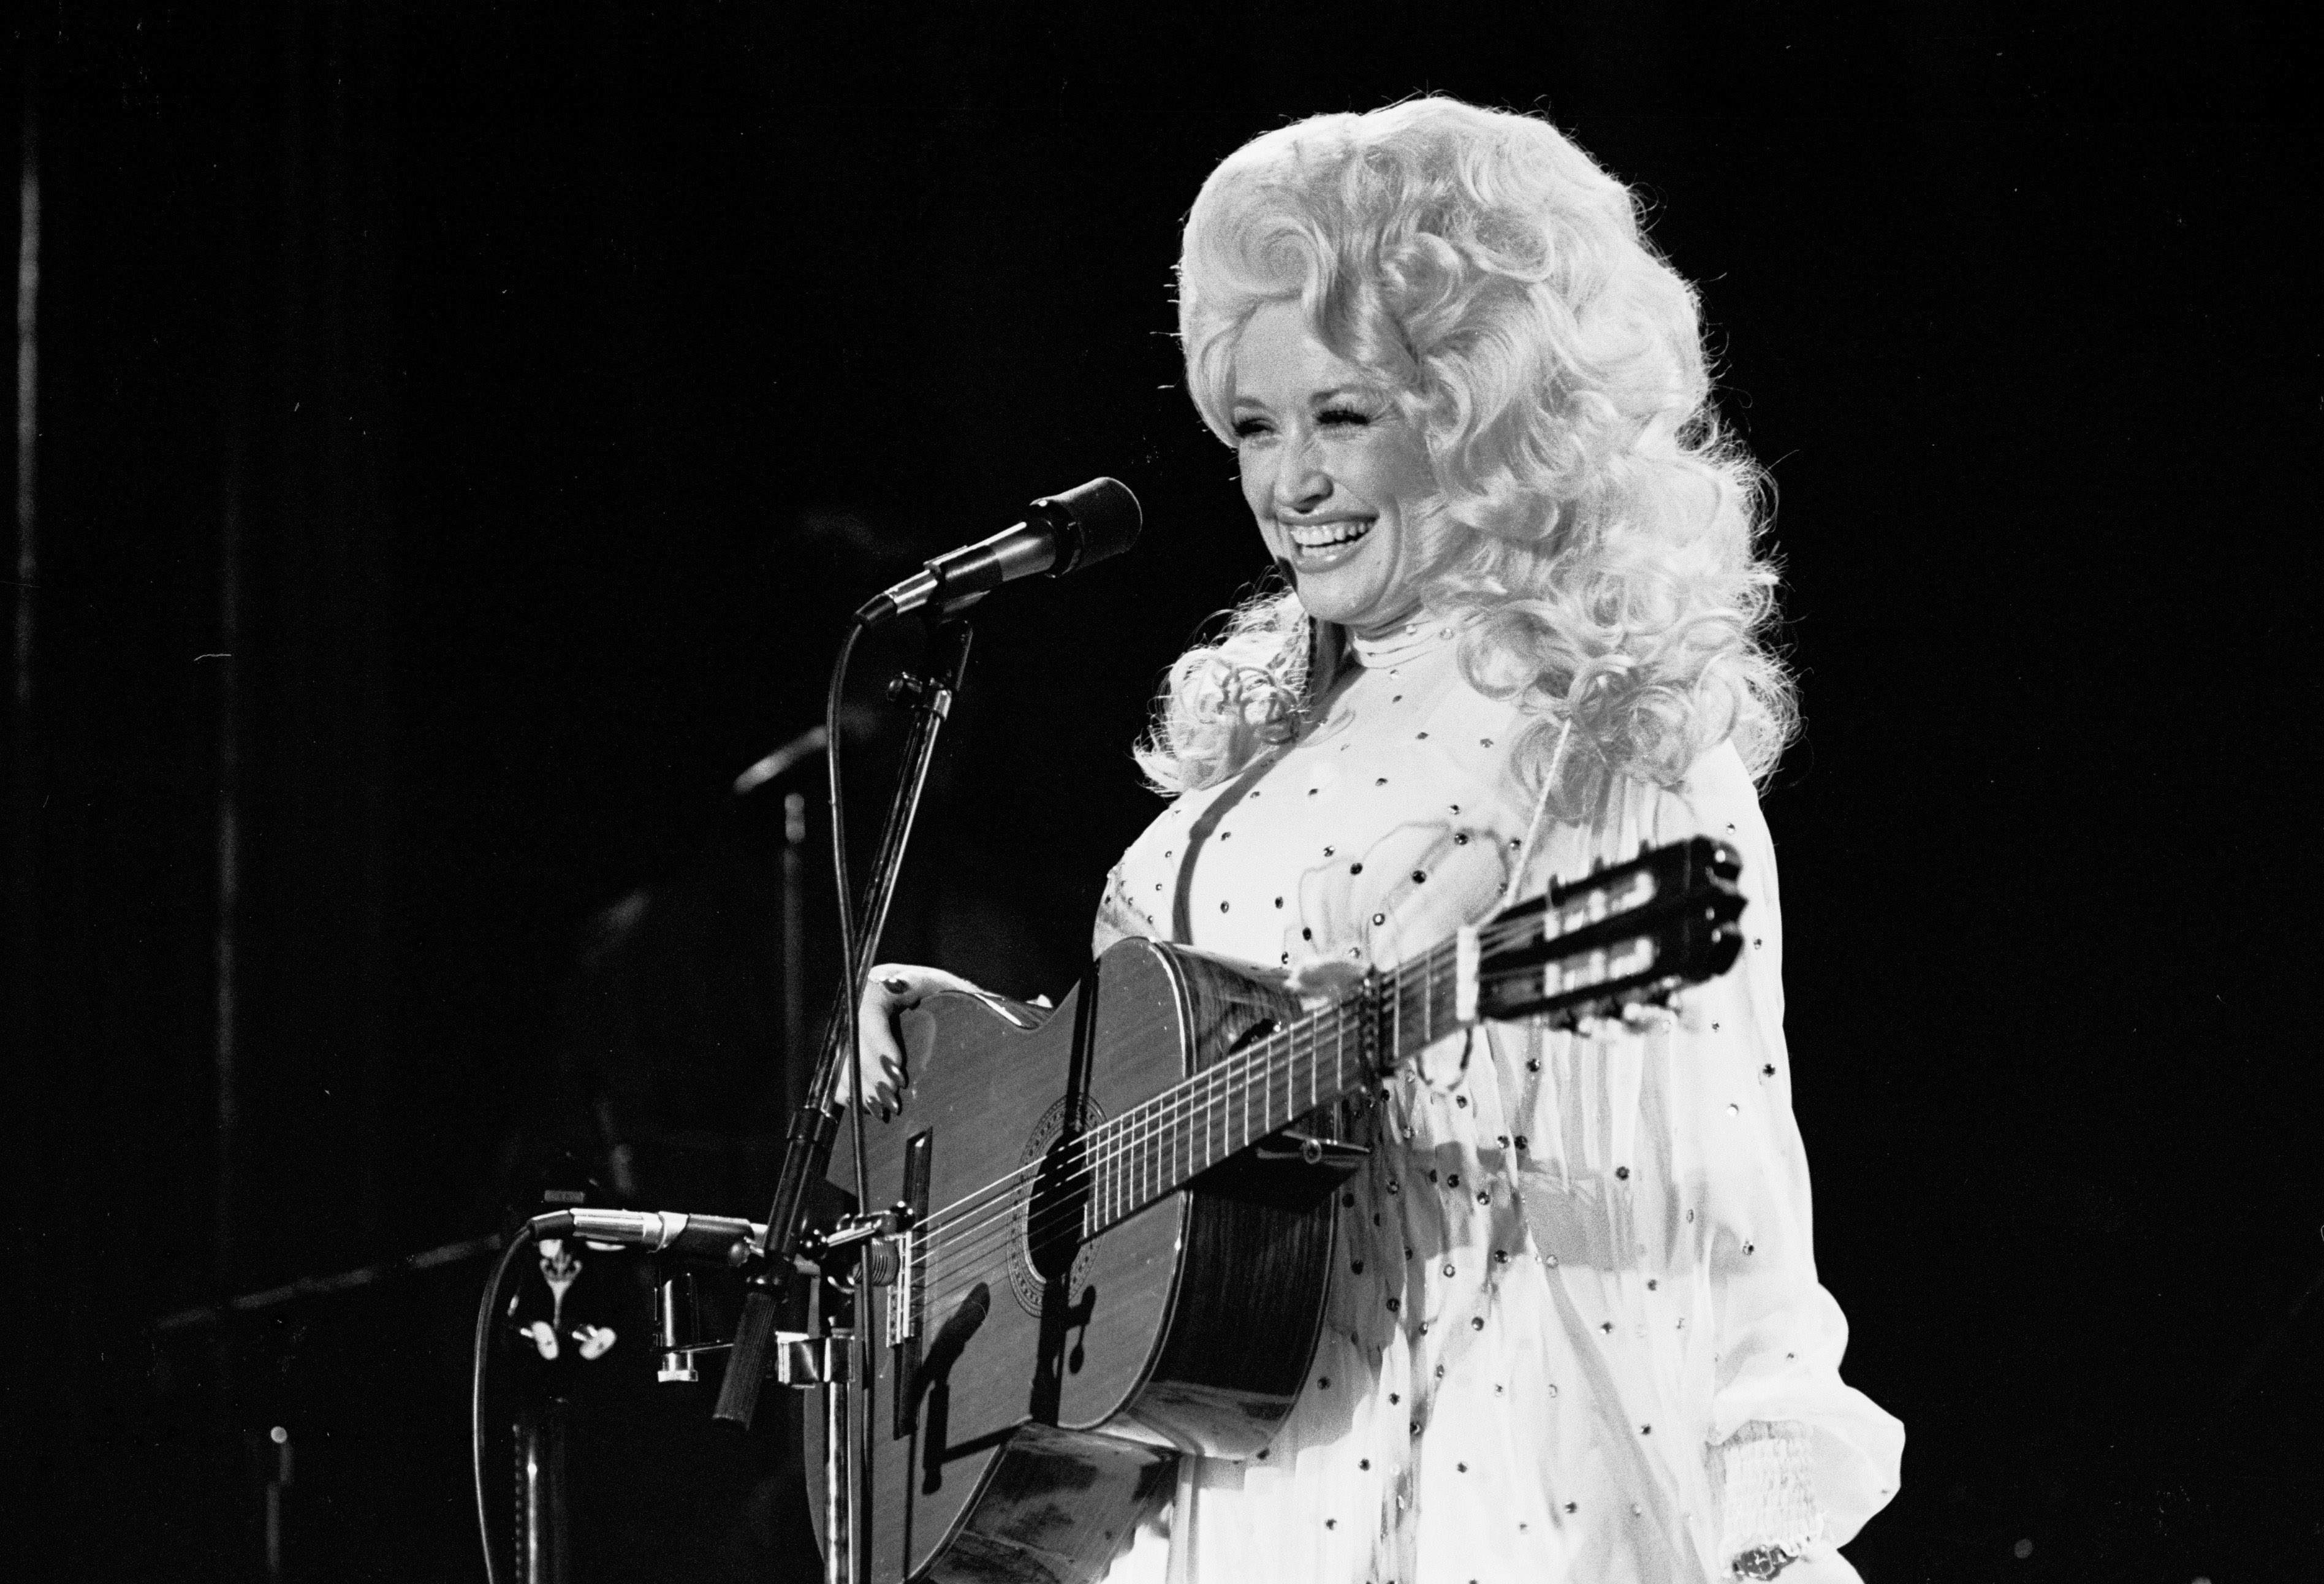 Dolly Parton on stage with a guitar.